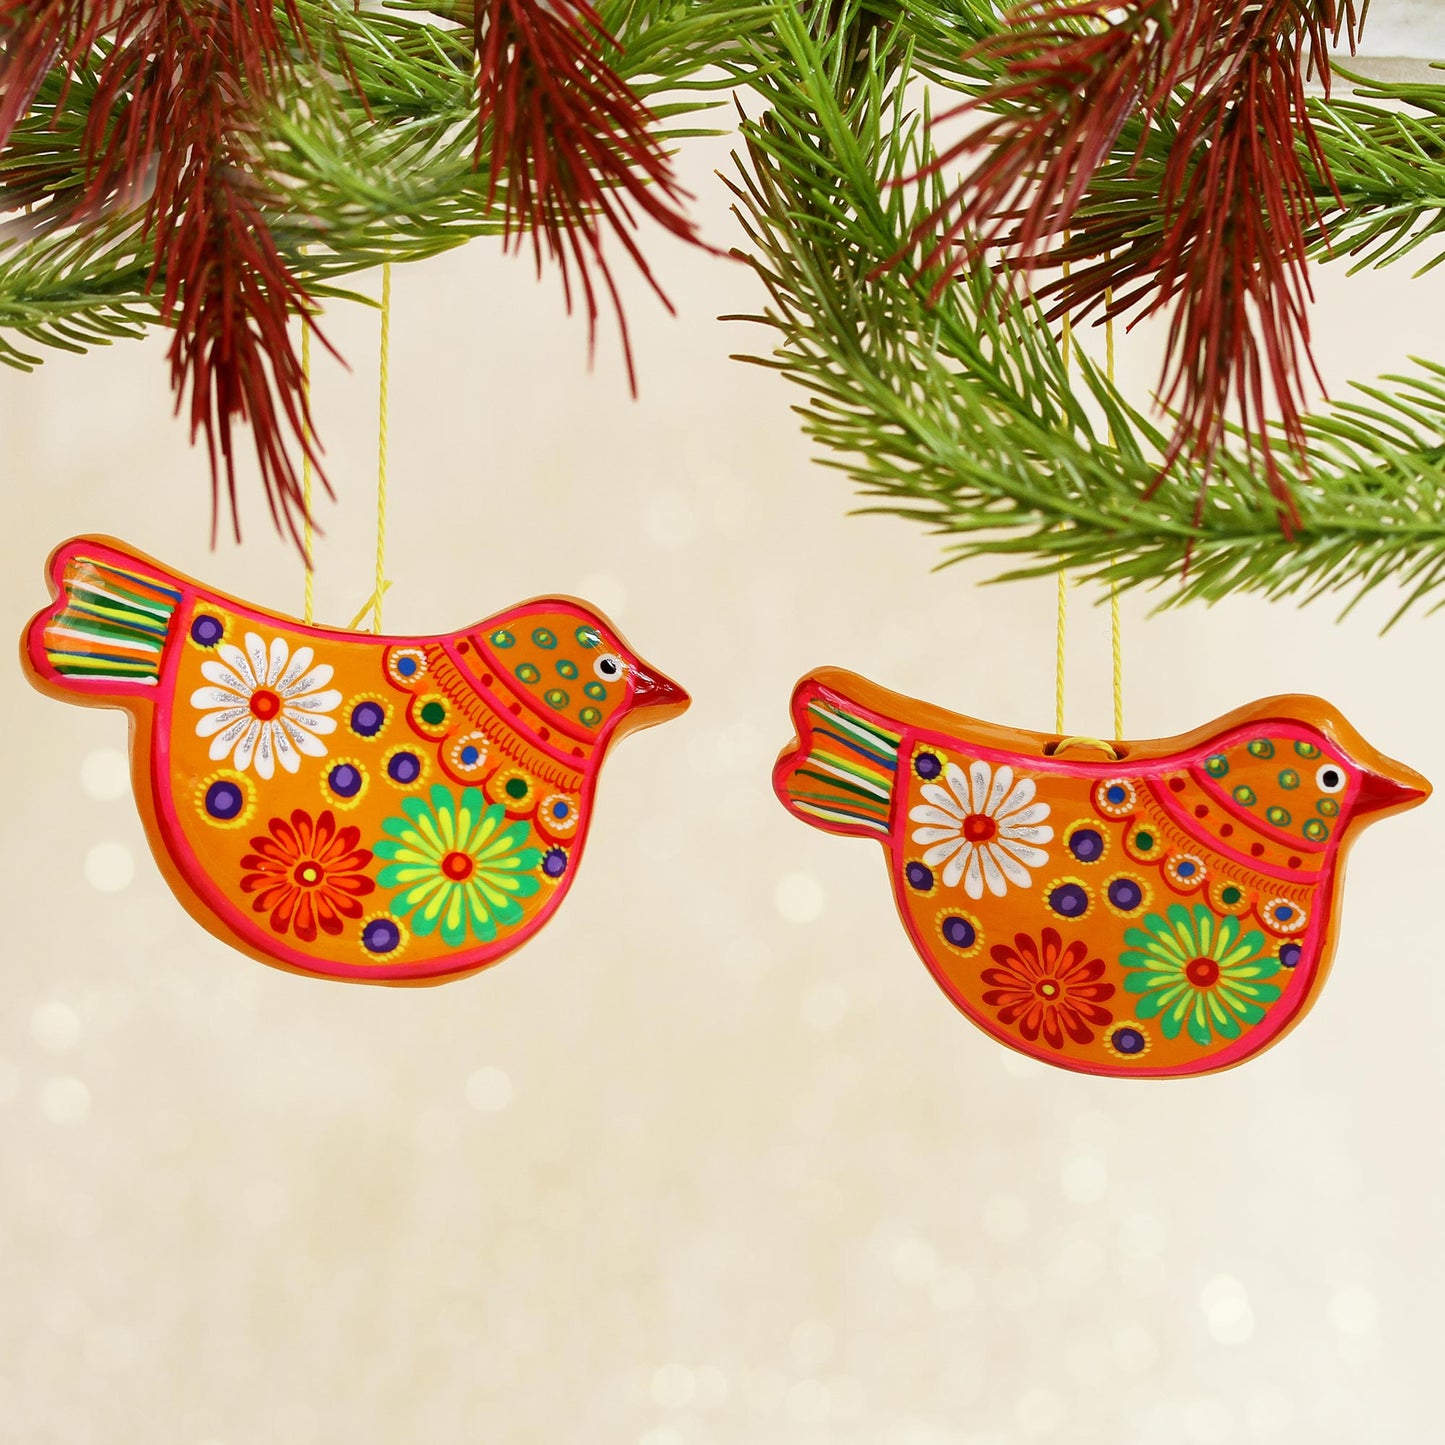 Marigold Dove 2 Yellow Floral Ceramic Peace Dove Ornaments Crafted by Hand